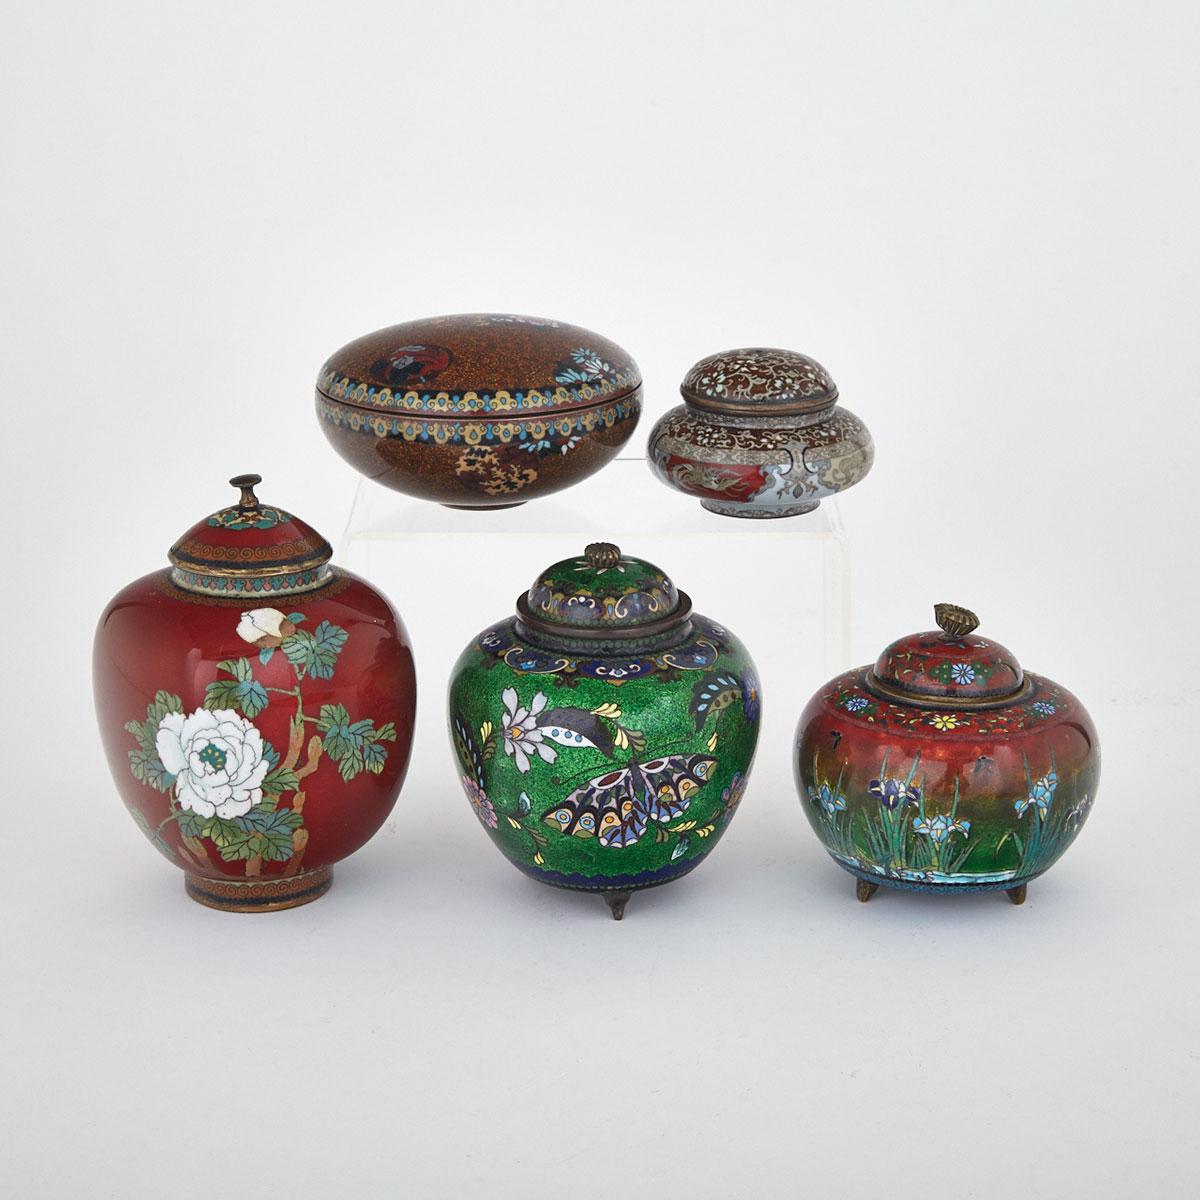 Five Cloisonné Enamel Covered Containers, Japan, Early 20th Century